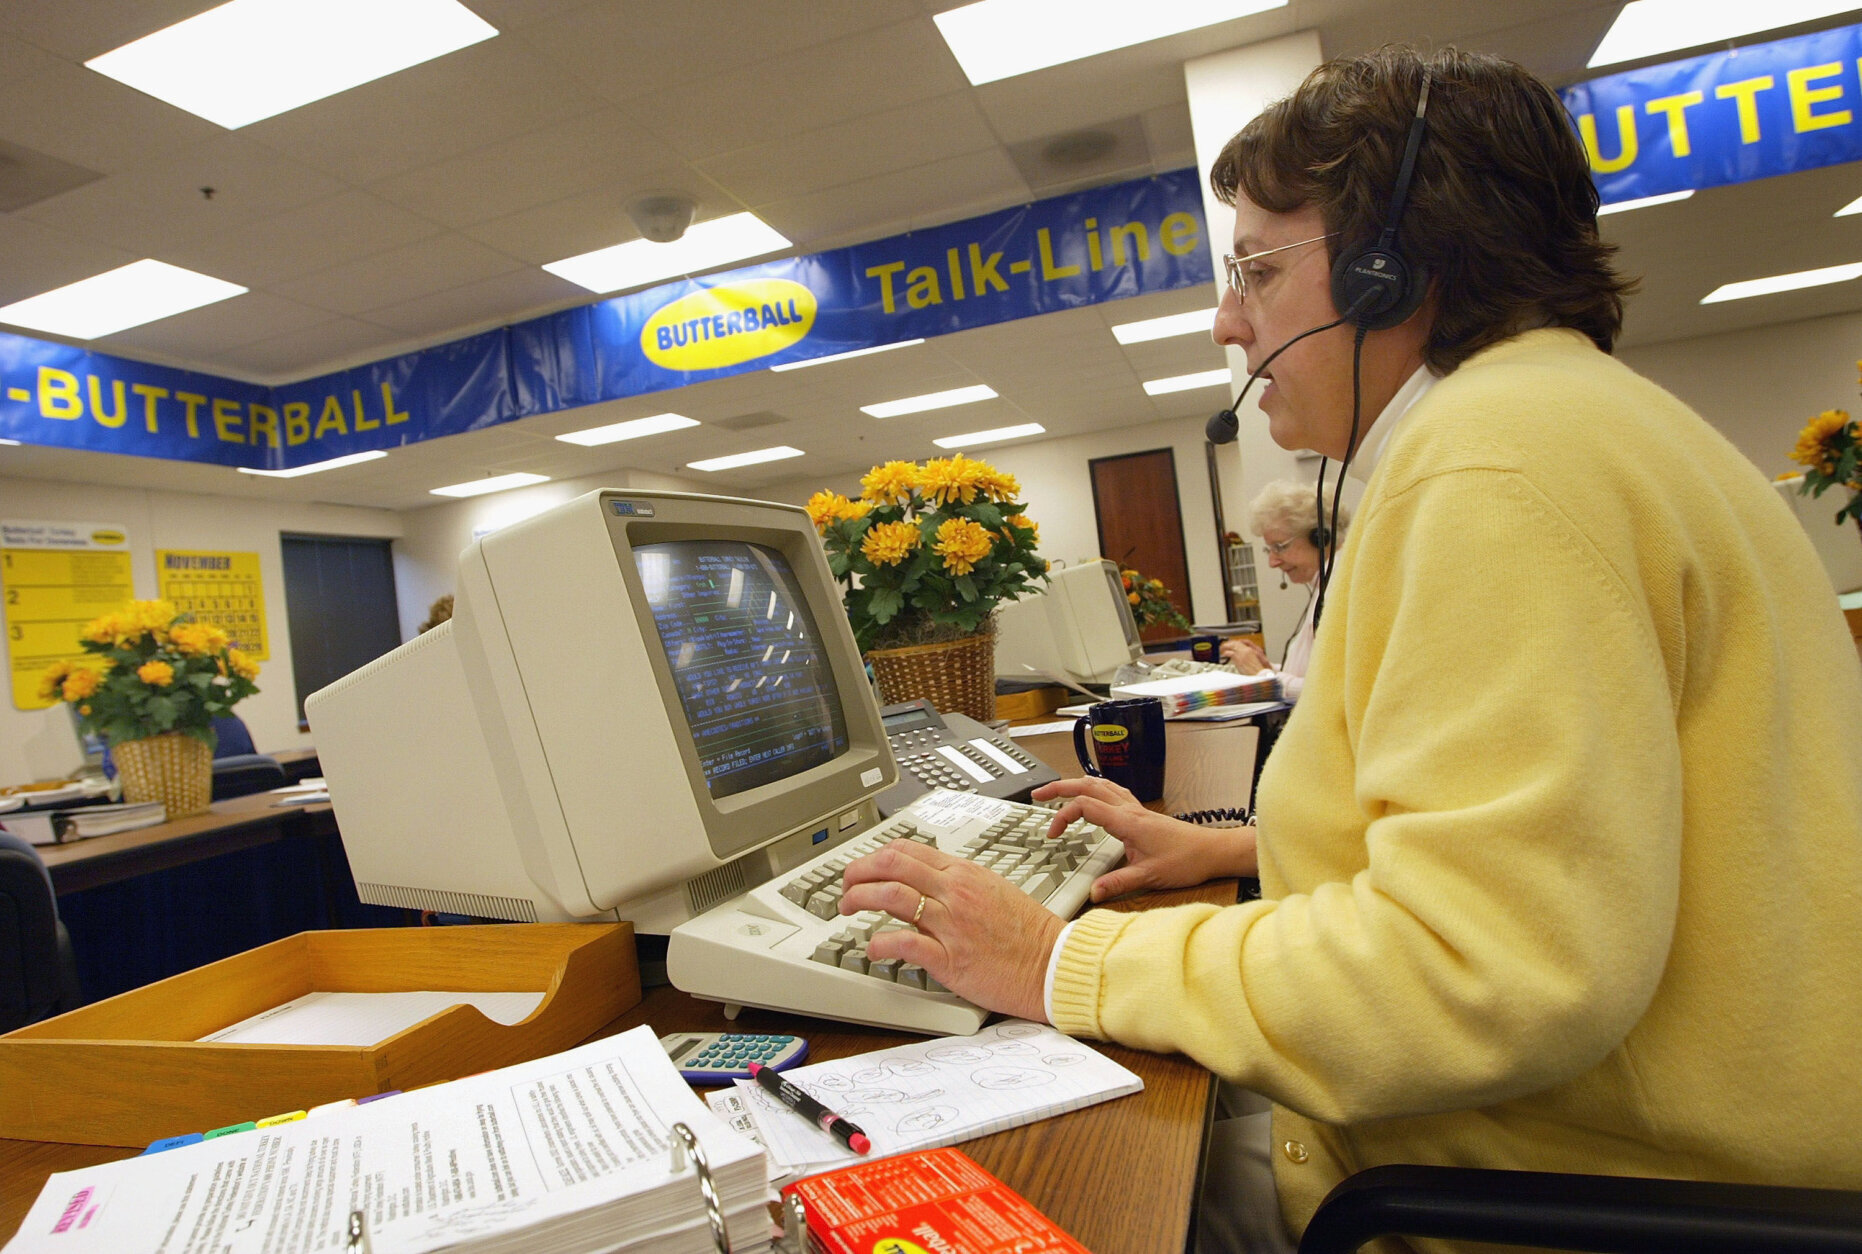 DOWNERS GROVE, IL - NOVEMBER 24: 3-year-veteran Butterball Turkey Talk-Line home economist Jane Schuelke answers questions on her telephone headset at the Butterball Turkey Talk-Line headquarters November 24, 2003 in Downers Grove, Illinois. The Butterball Talk-Line was created to assist everyone from first-time cooks to seasoned chefs with preparing their holiday bird. Originally staffed with six home economists who responded to 11,000 phone calls in its first year alone, today the Talk-Line is staffed with nearly 50 home economists and nutritionists who respond to more than 100,000 questions each November and December. ConAgra Foods opened the Butterball Turkey Talk-Line in 1981. (Photo by Tim Boyle/Getty Images)